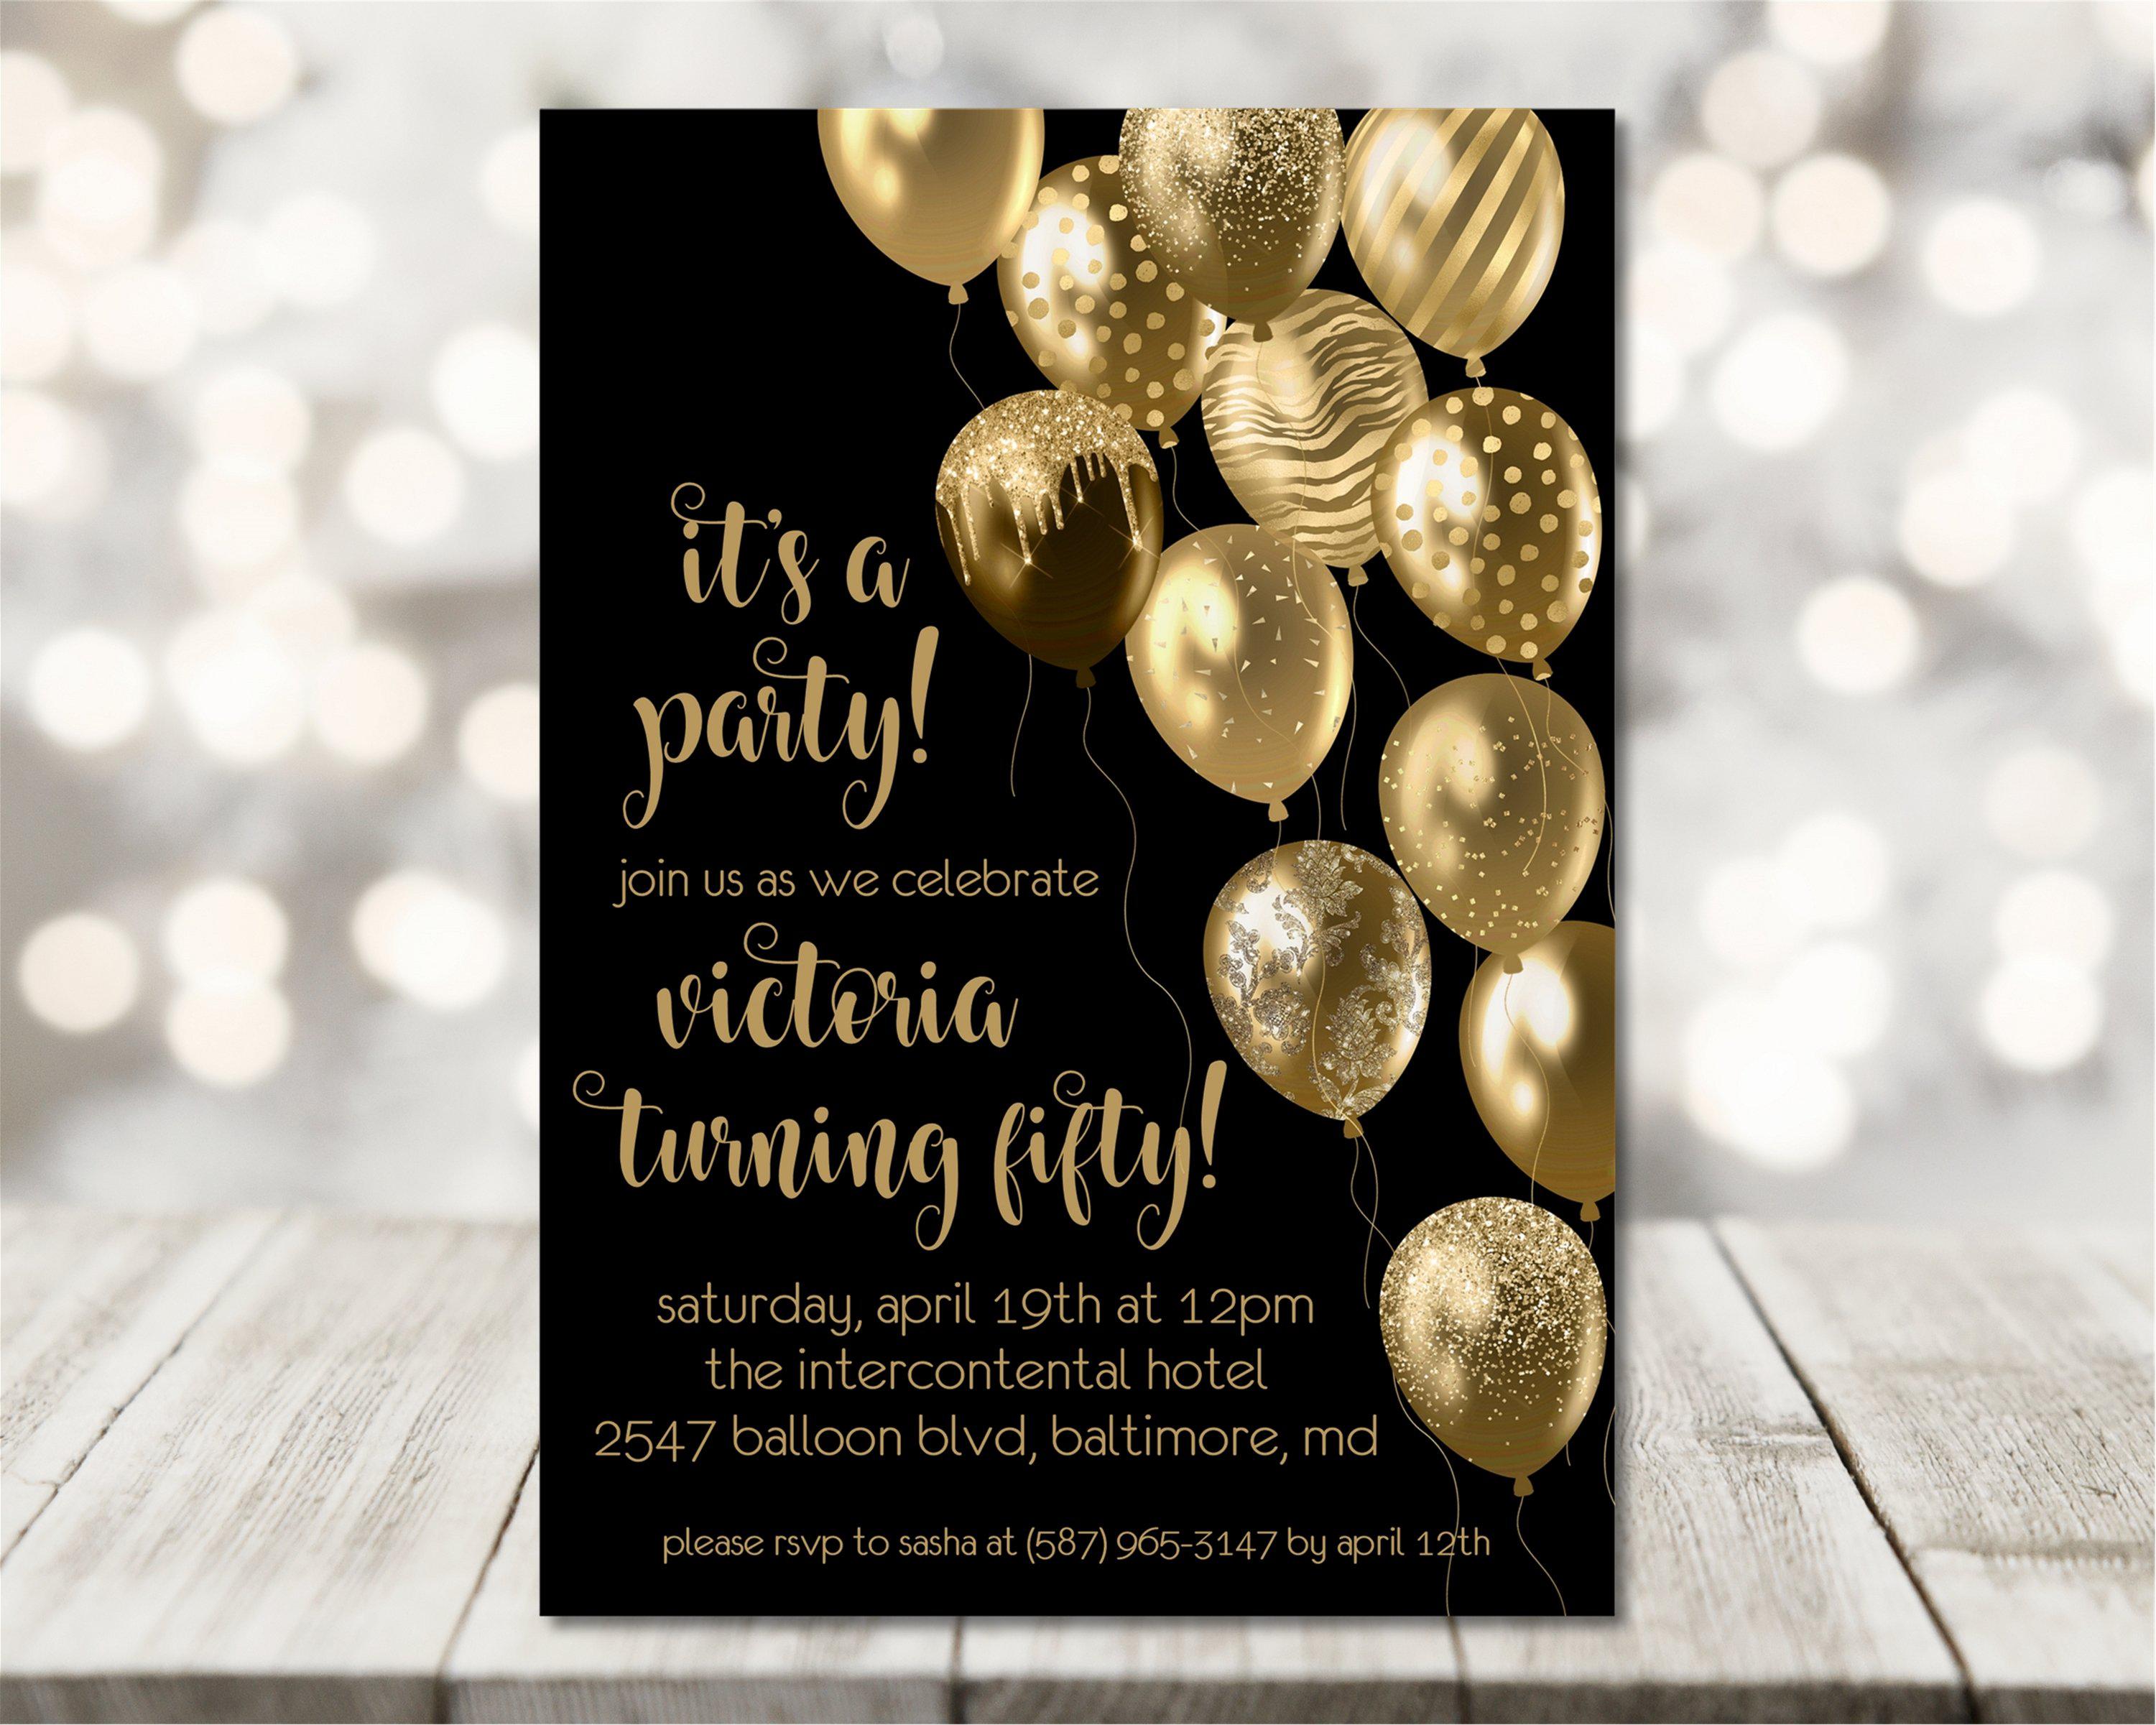 Black And Gold Balloon Birthday Party Invitations